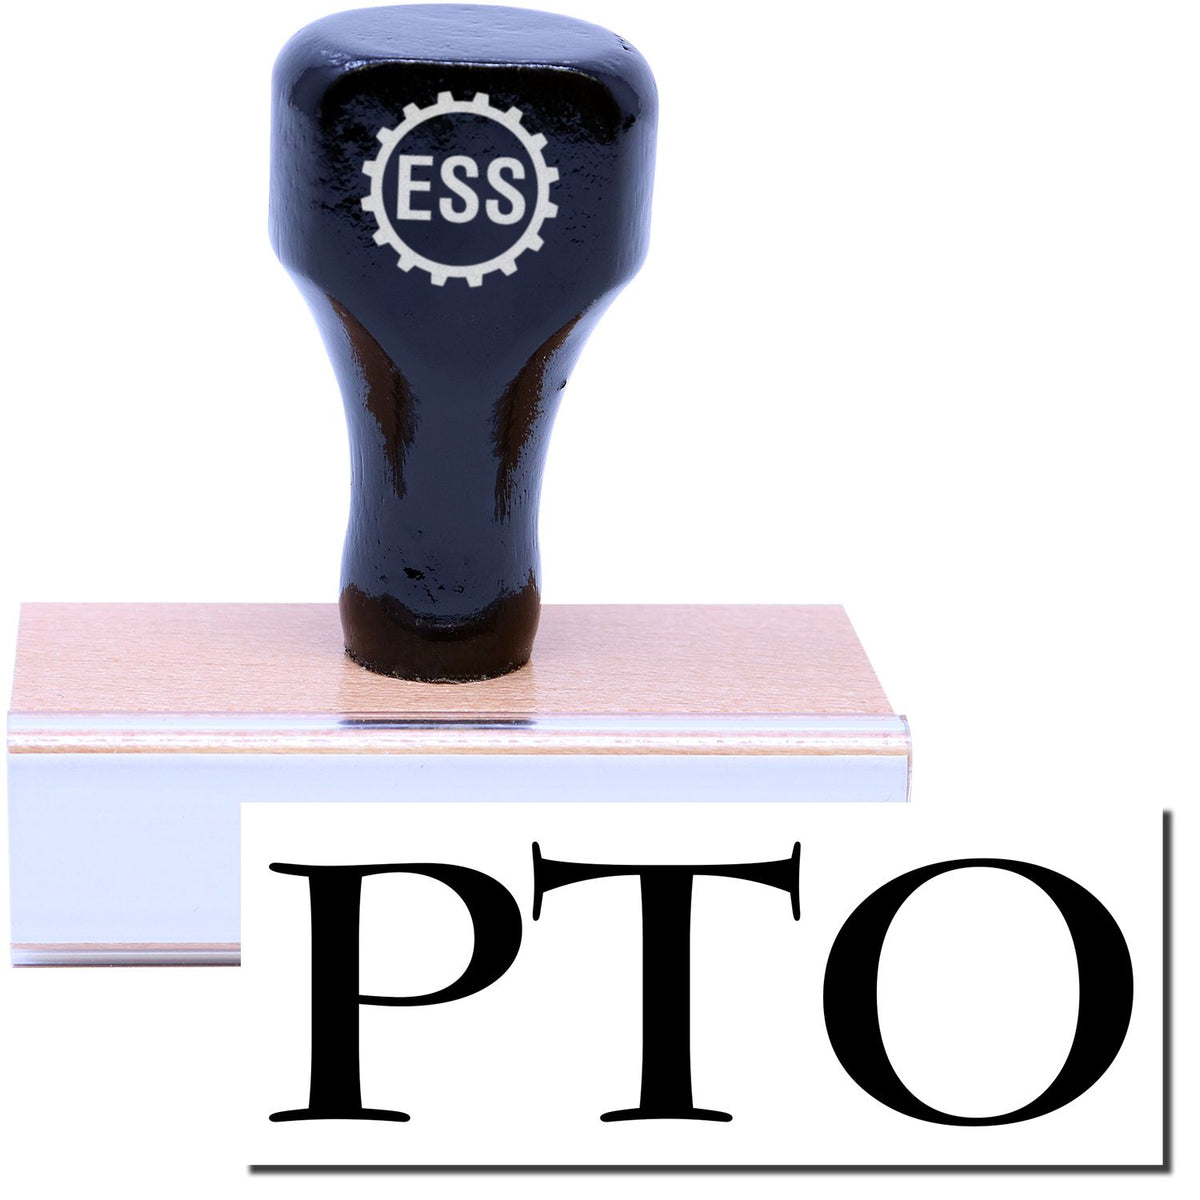 A stock office rubber stamp with a stamped image showing how the text &quot;PTO&quot; in a large font is displayed after stamping.